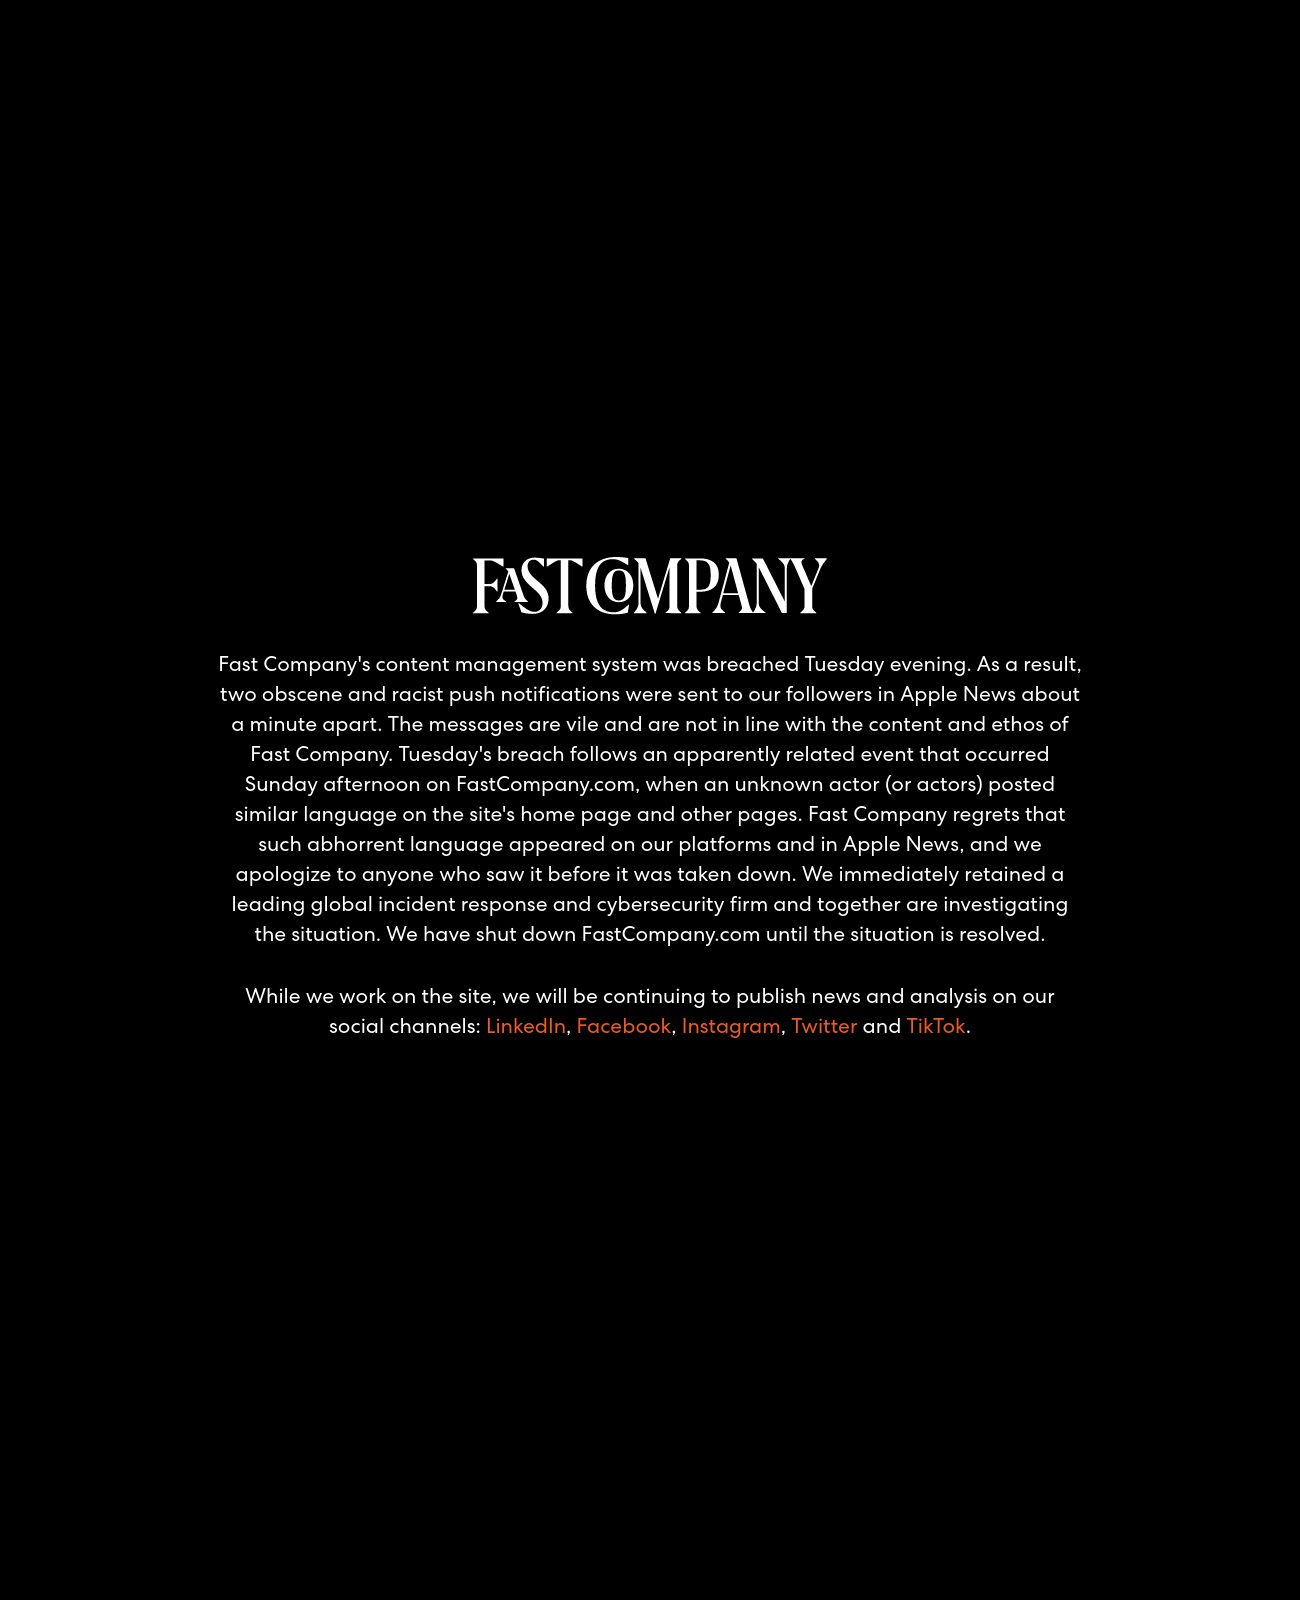 Fast Company at 2022-10-02 13:46:18-04:00 local time